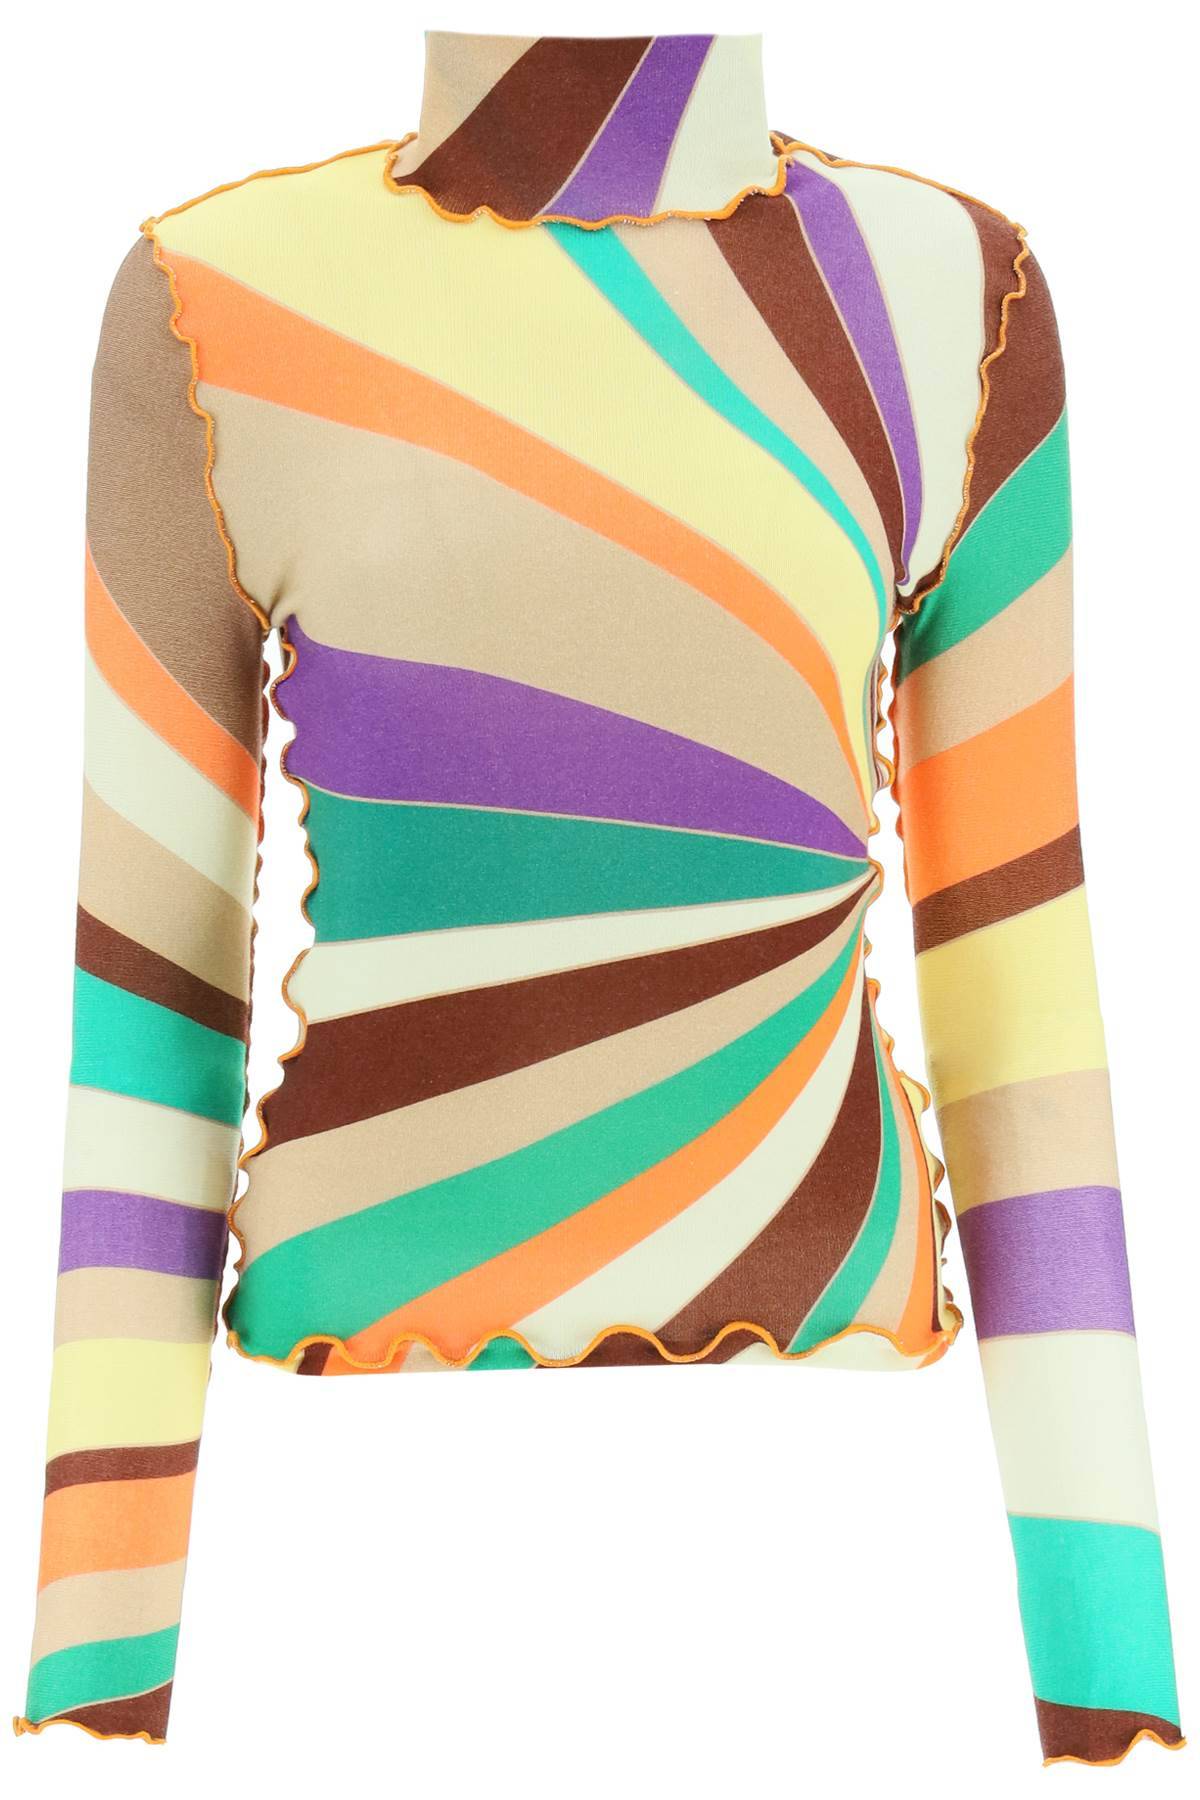 SIEDRES SIEDRES multicolored turtleneck sweater with gathered stitching